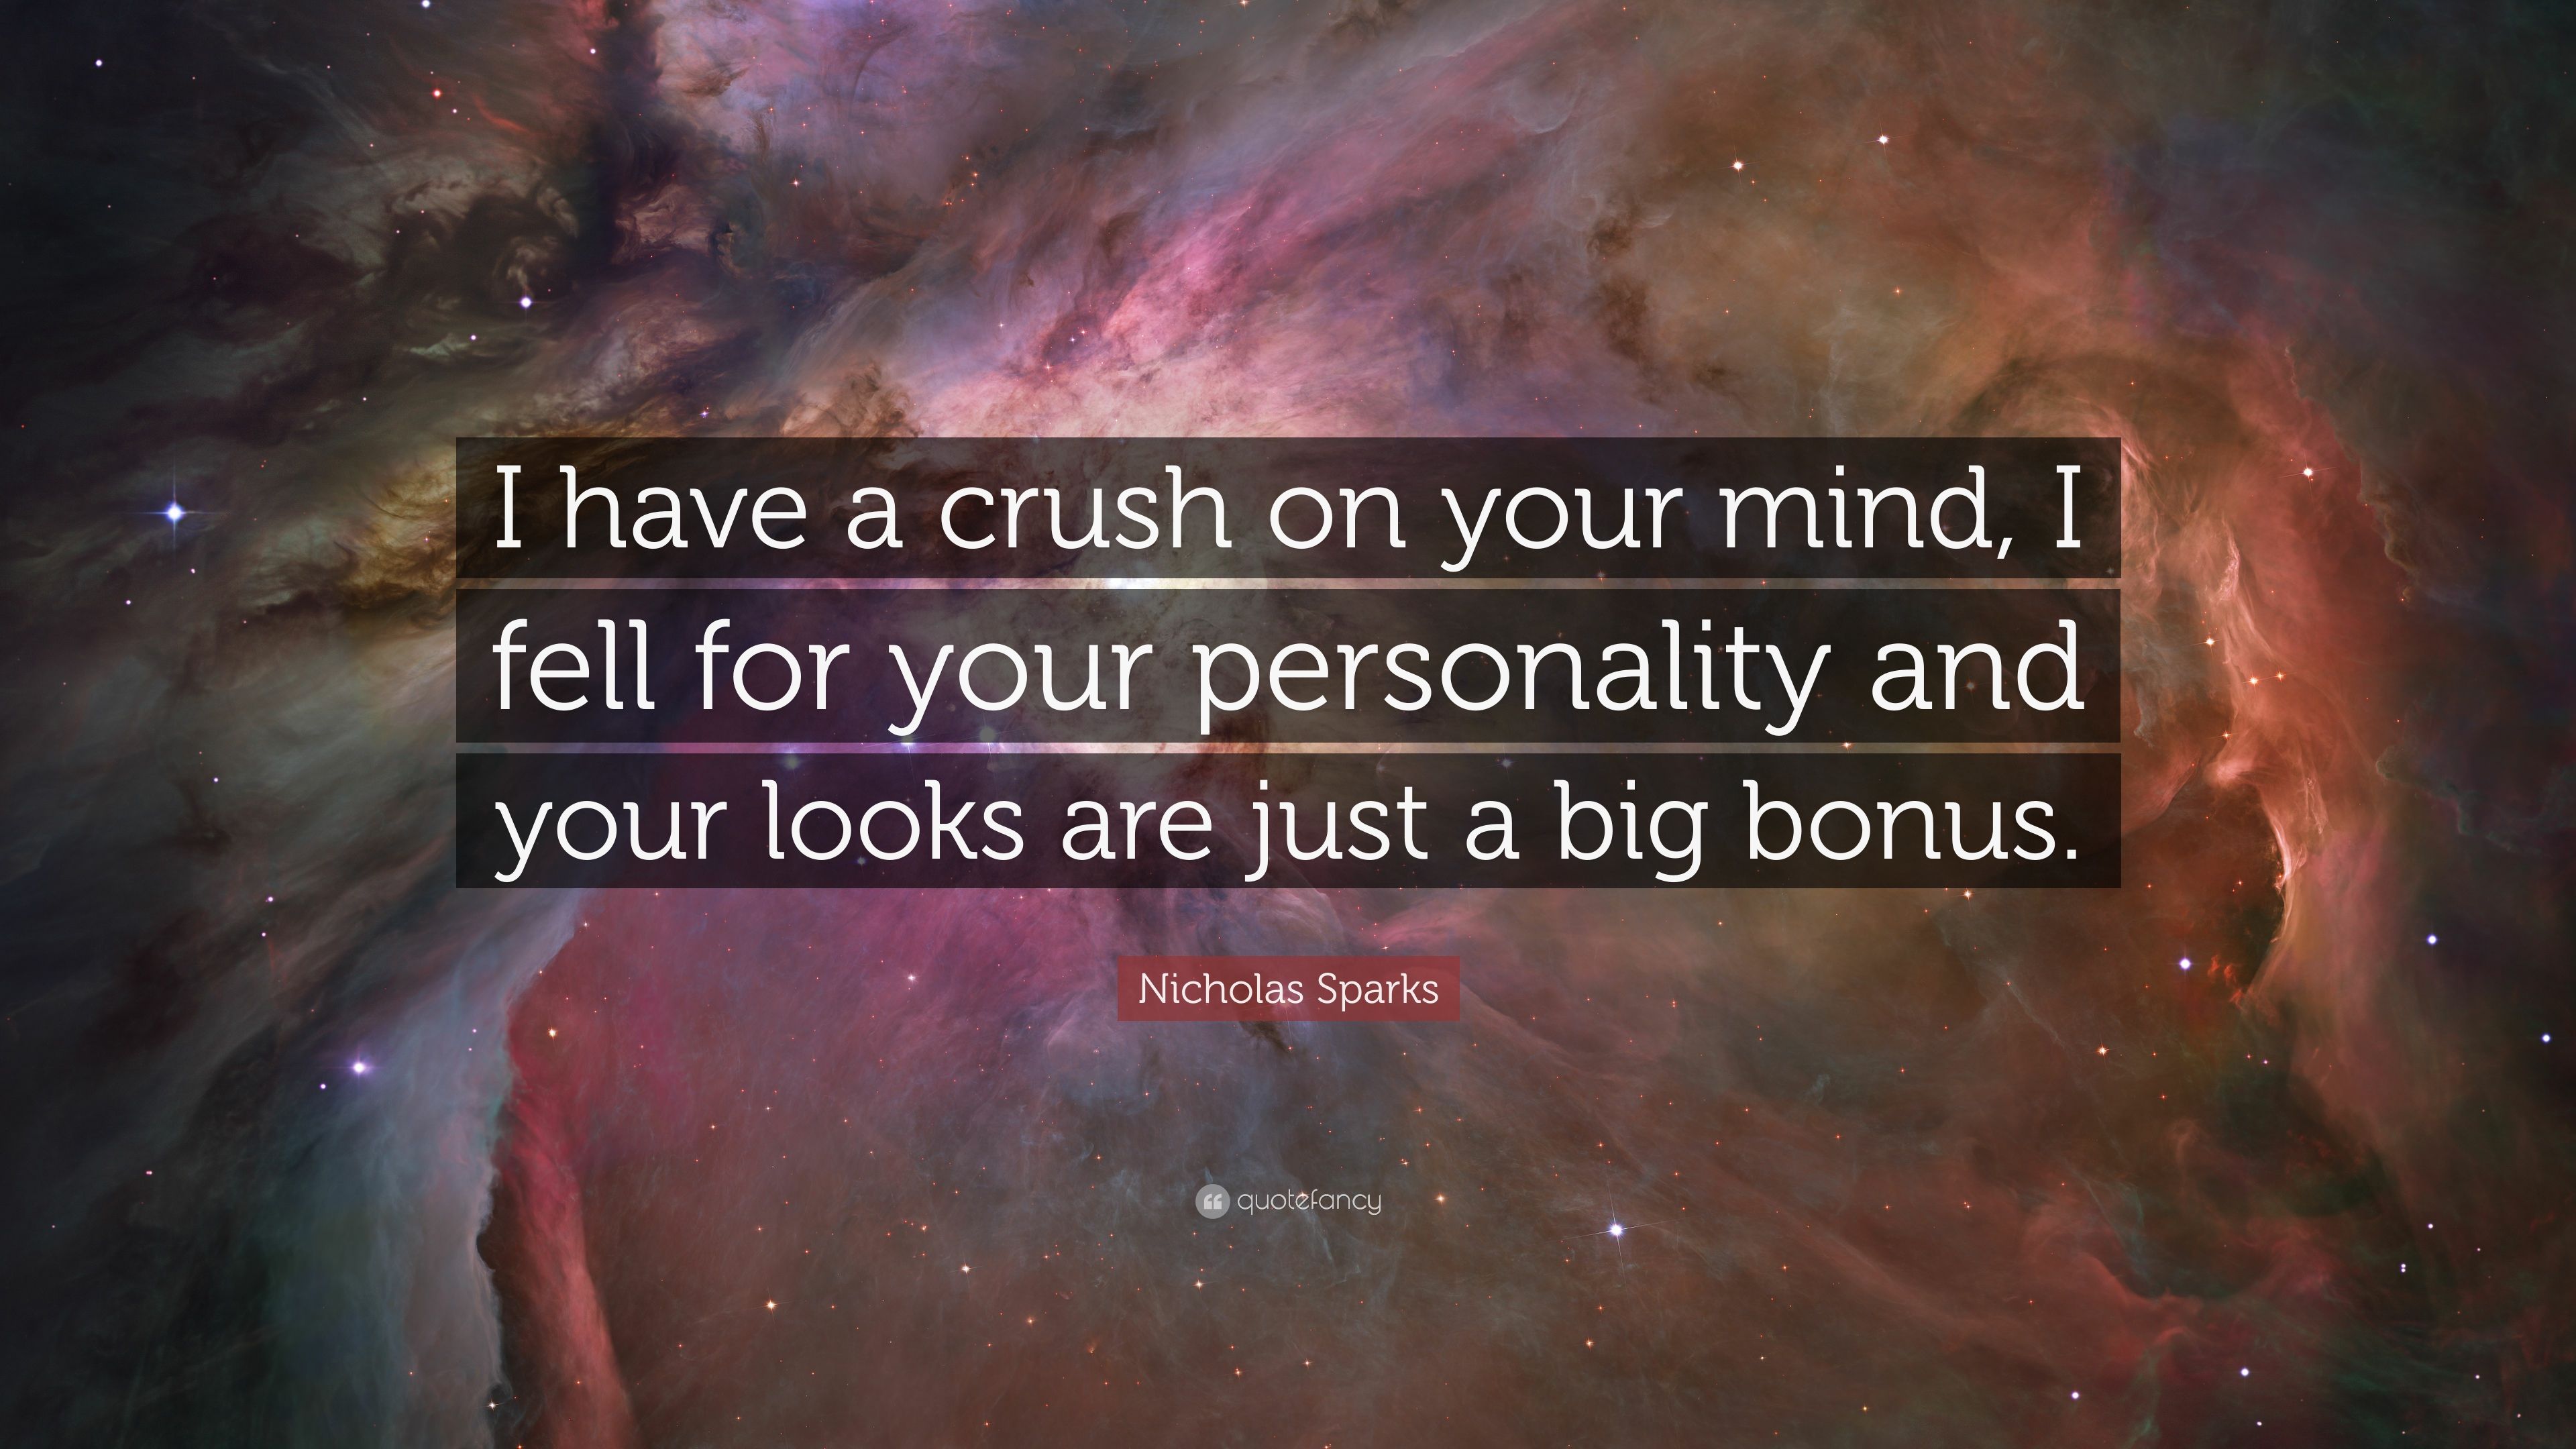 Nicholas Sparks Quote: “I have a crush on your mind, I fell for your personality and your looks are just a big bonus.” (10 wallpaper)